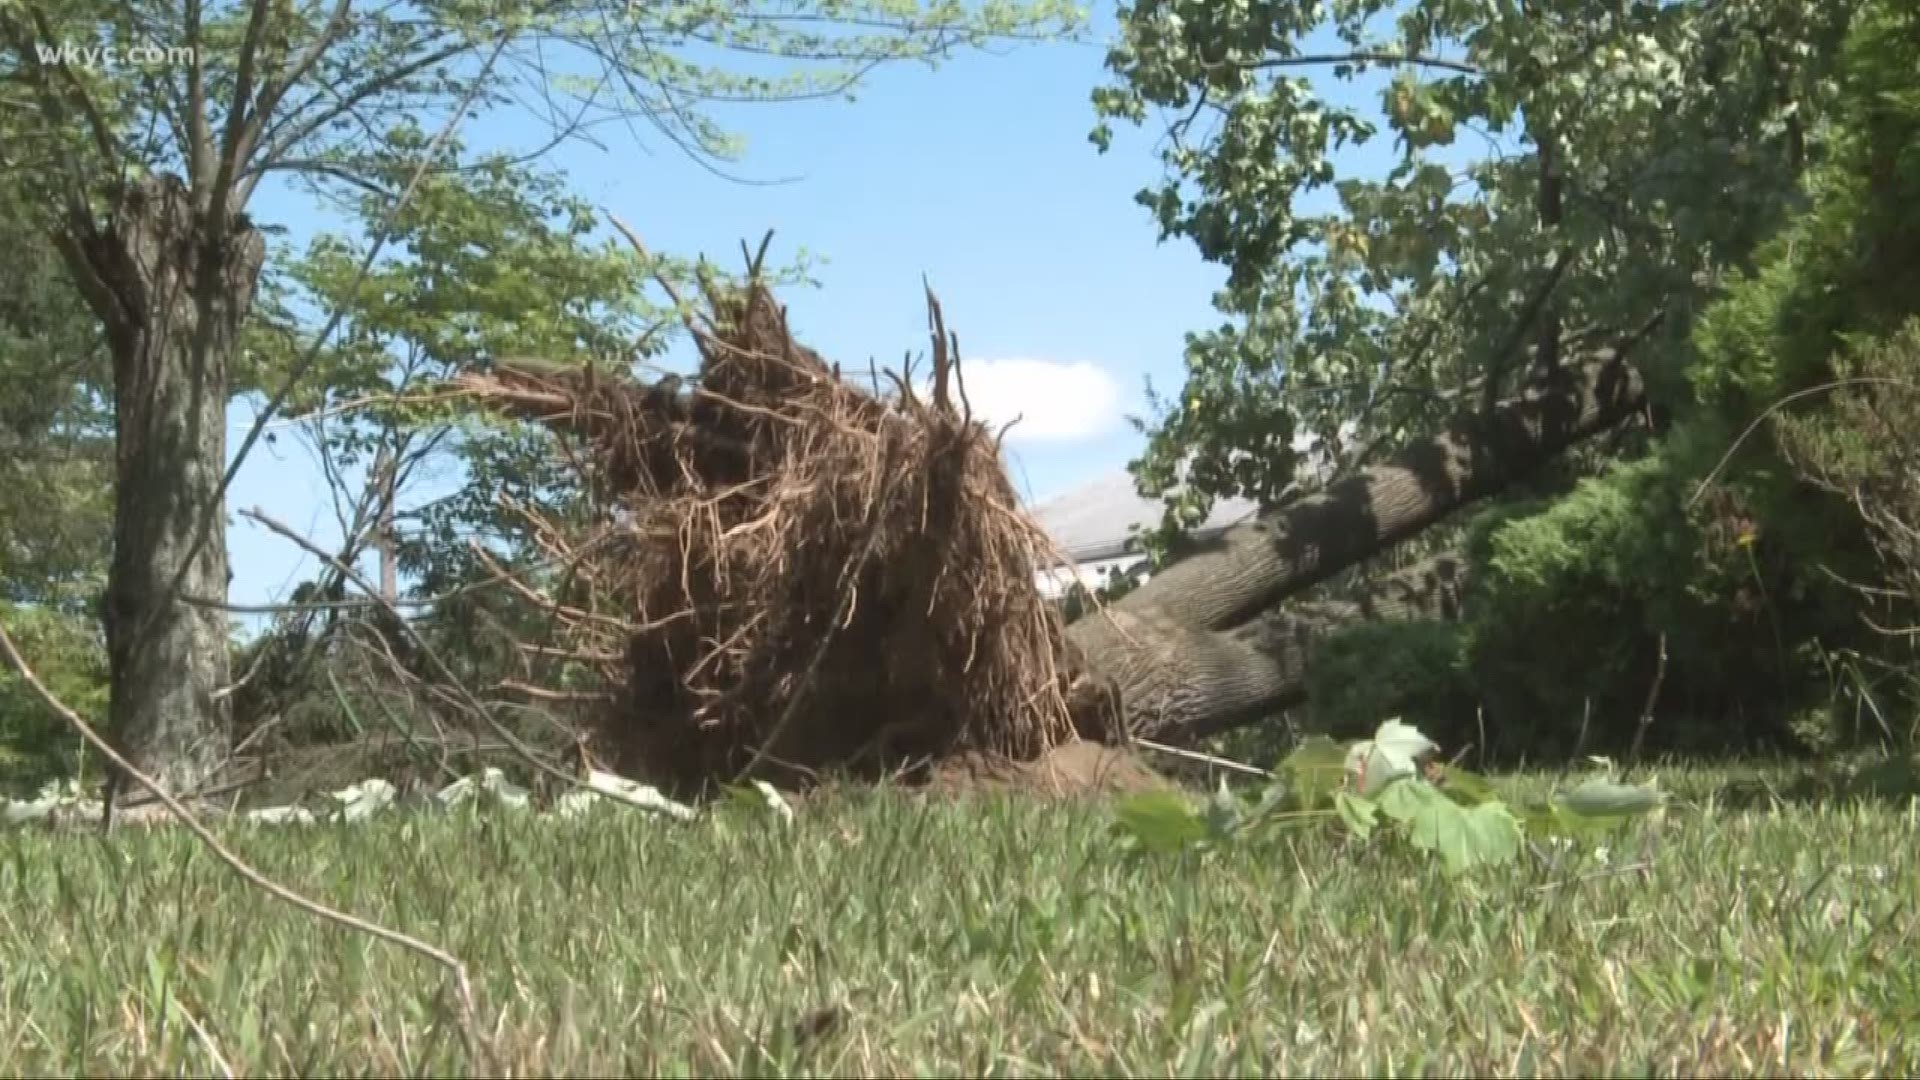 The storms left plenty of damage in Summit County, including trees falling on top of homes, and downed power lines.